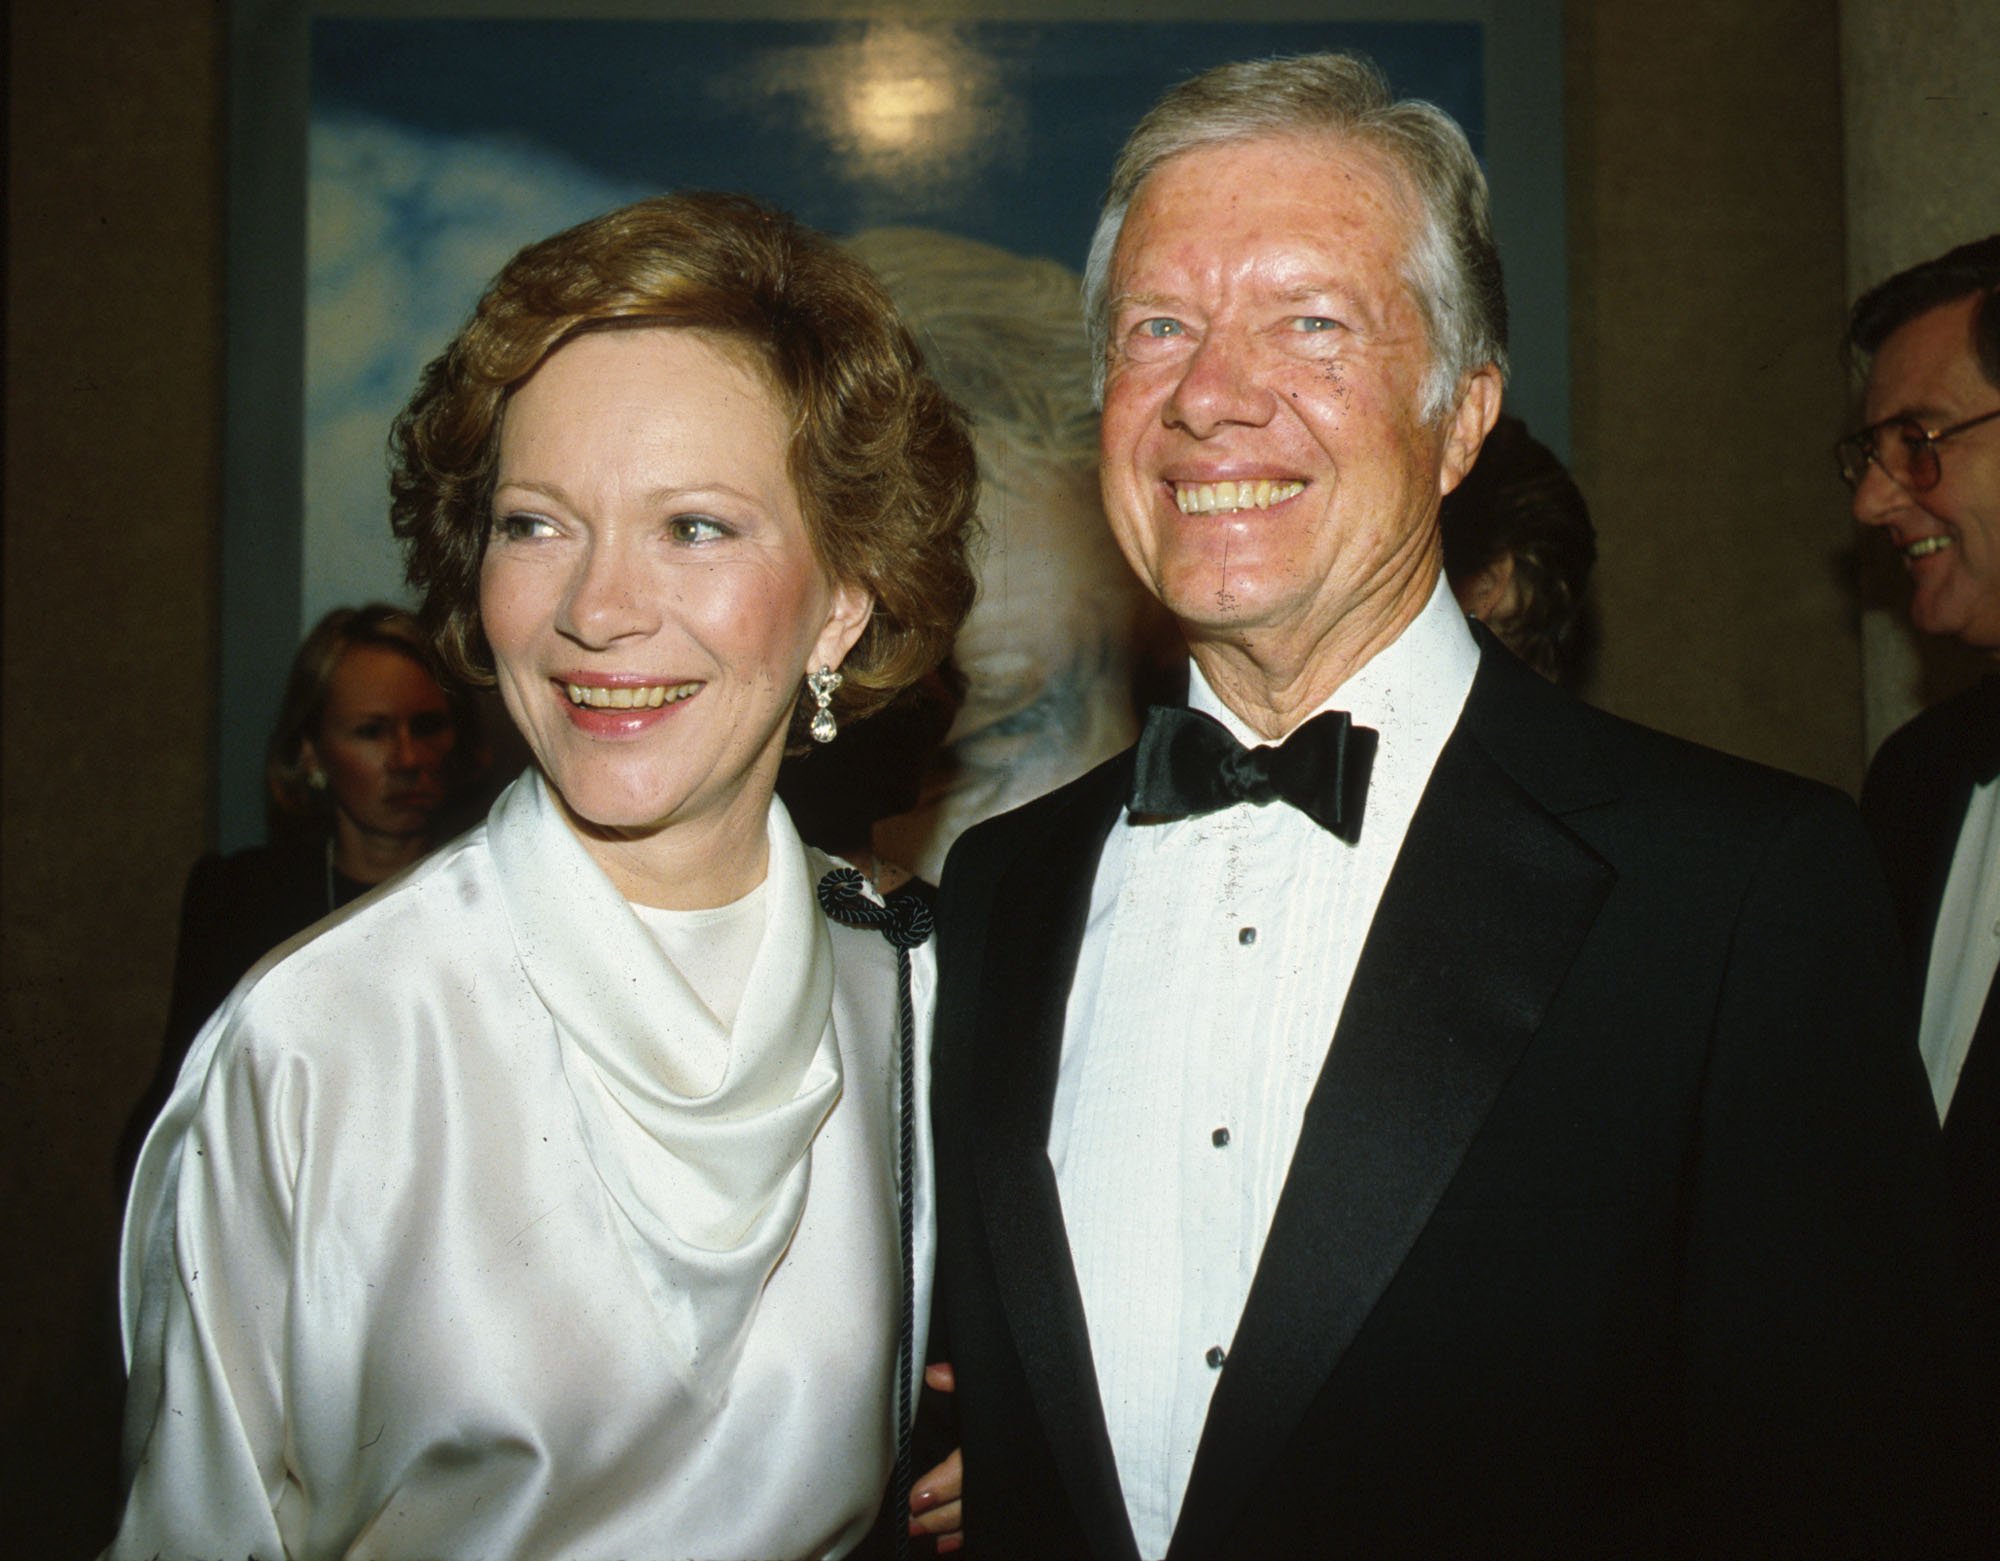 Jimmy and Rosalynn Carter in New York City, NY, October 4, 1983. | Source: Getty Images.